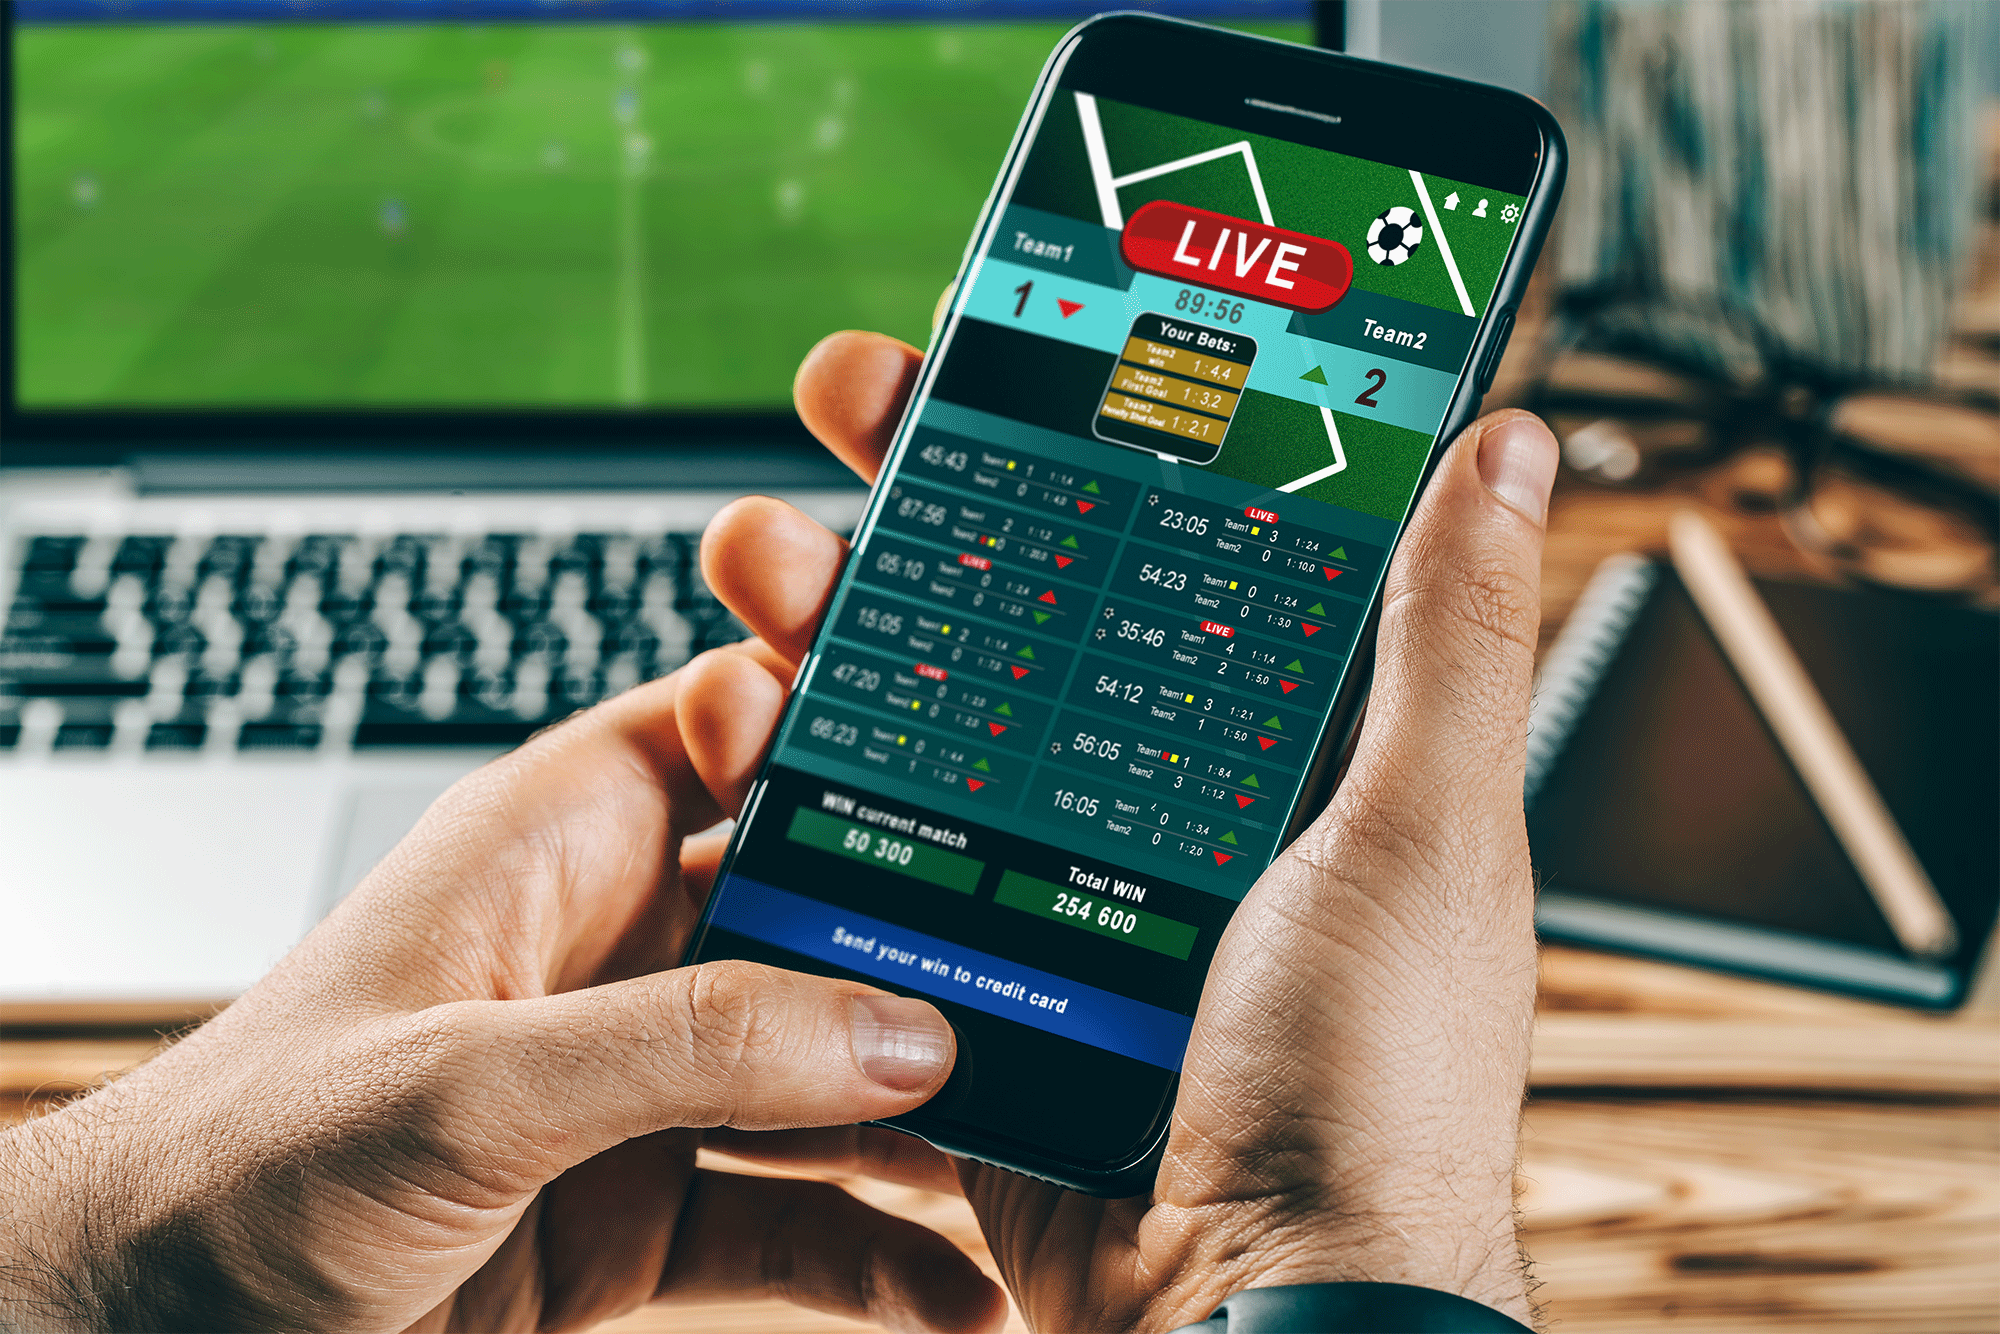 What Everyone Should Be aware Of Online Betting